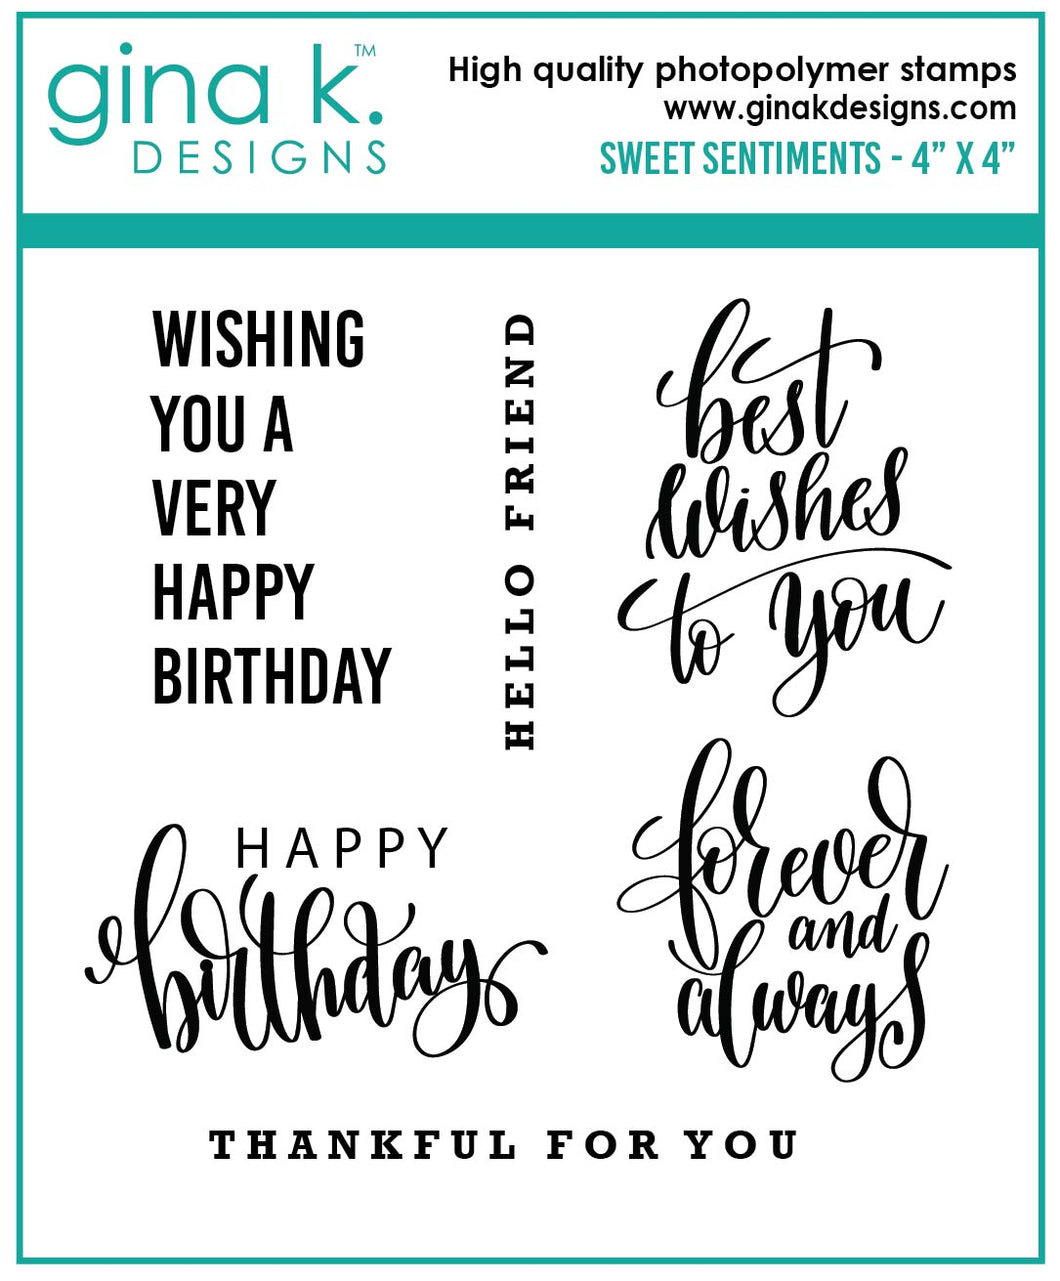 Gina K. Designs - Stamps - Sweet Sentiments. Sweet Sentiments is a stamp set by Gina K Designs. This set is made of premium clear photopolymer and measures 4